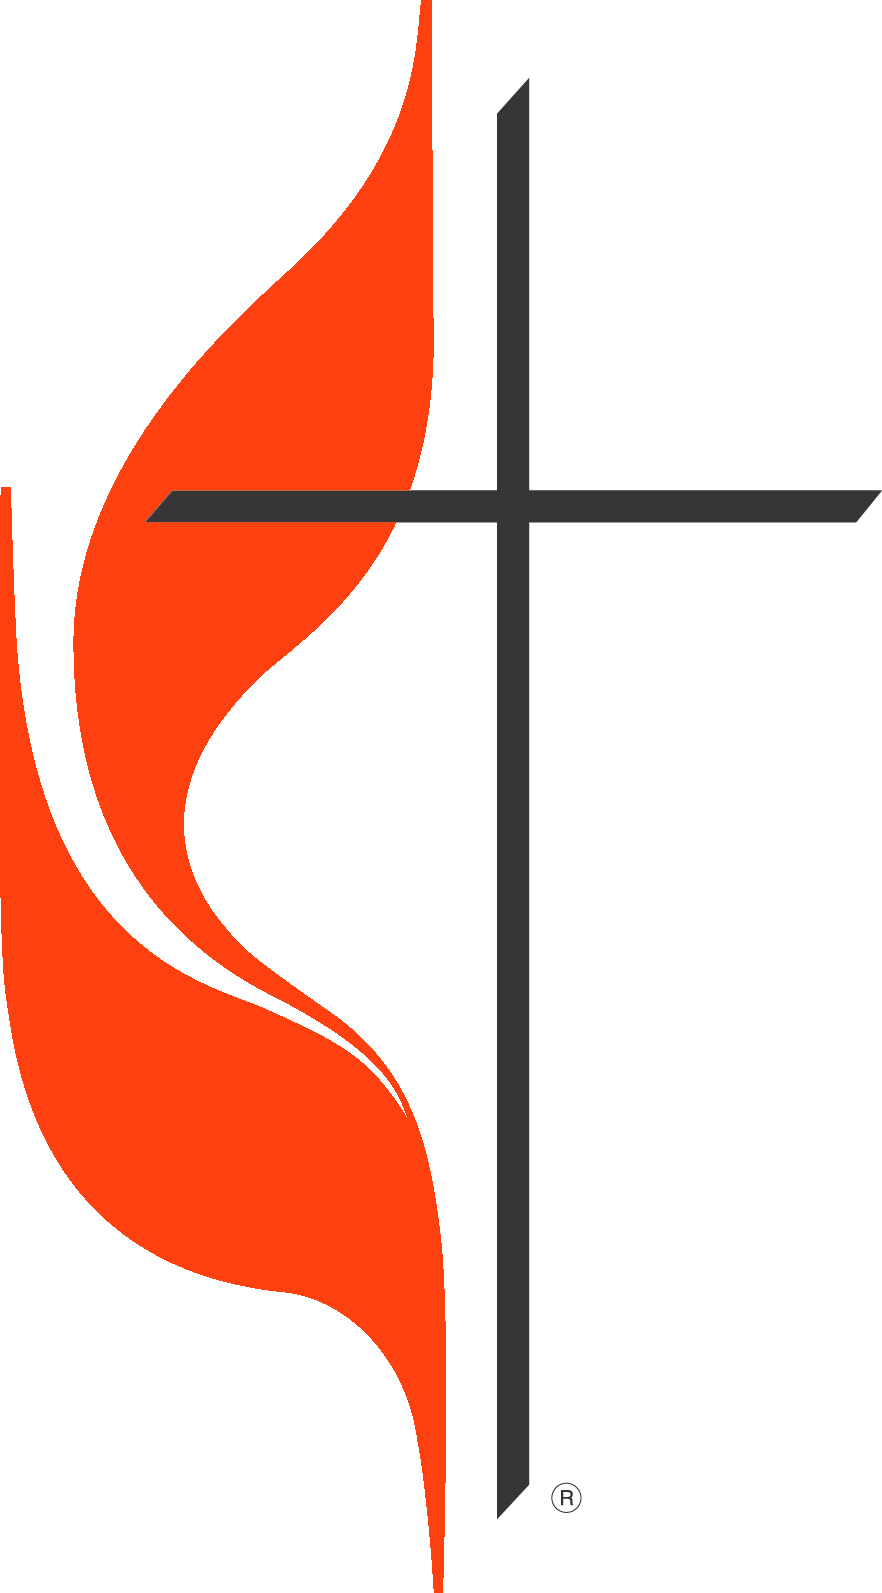 The Cross and Flame is a registered trademark and the use is supervised by the General Council on Finance and Administration of The United Methodist Church. Permission to use the Cross and Flame must be obtained from the General Council on Finance and Administration of The United Methodist Church